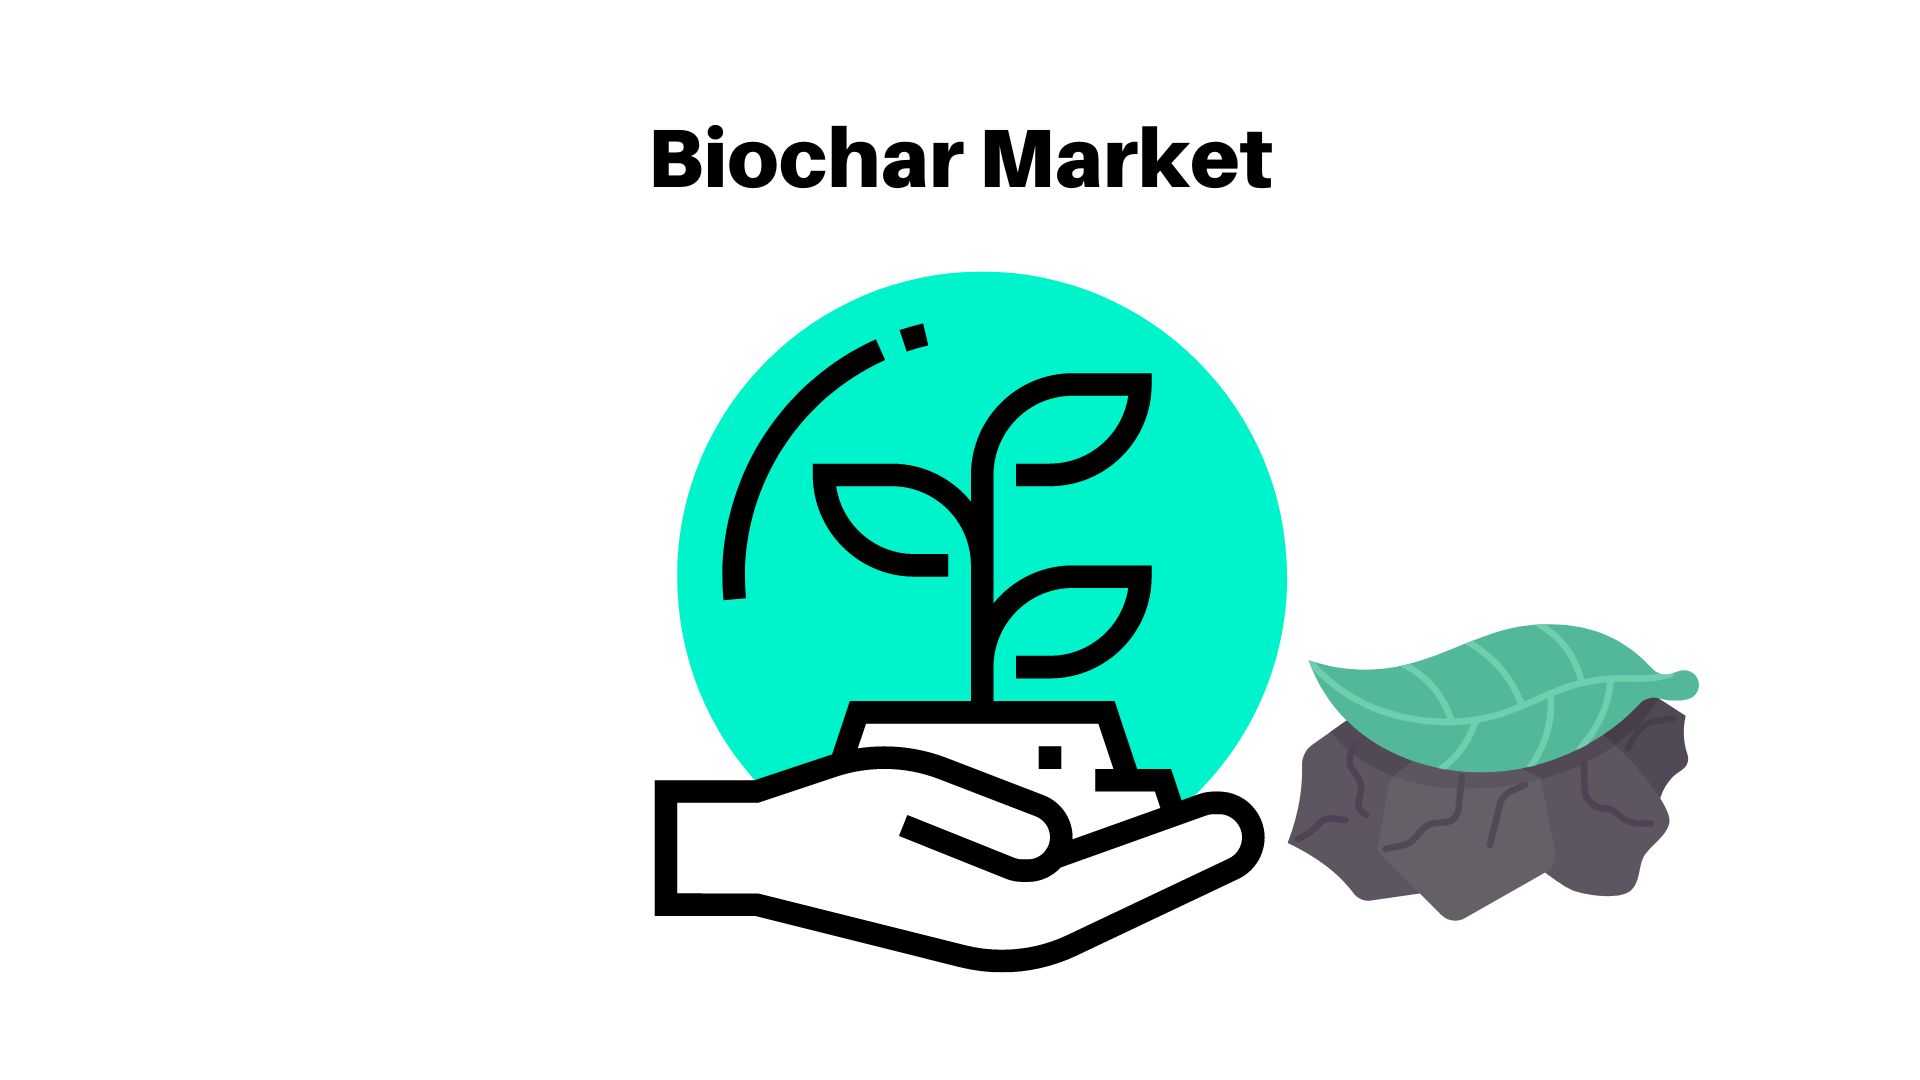 Biochar Market Is Expected To Rise At A CAGR Of 12.2% | Market.us